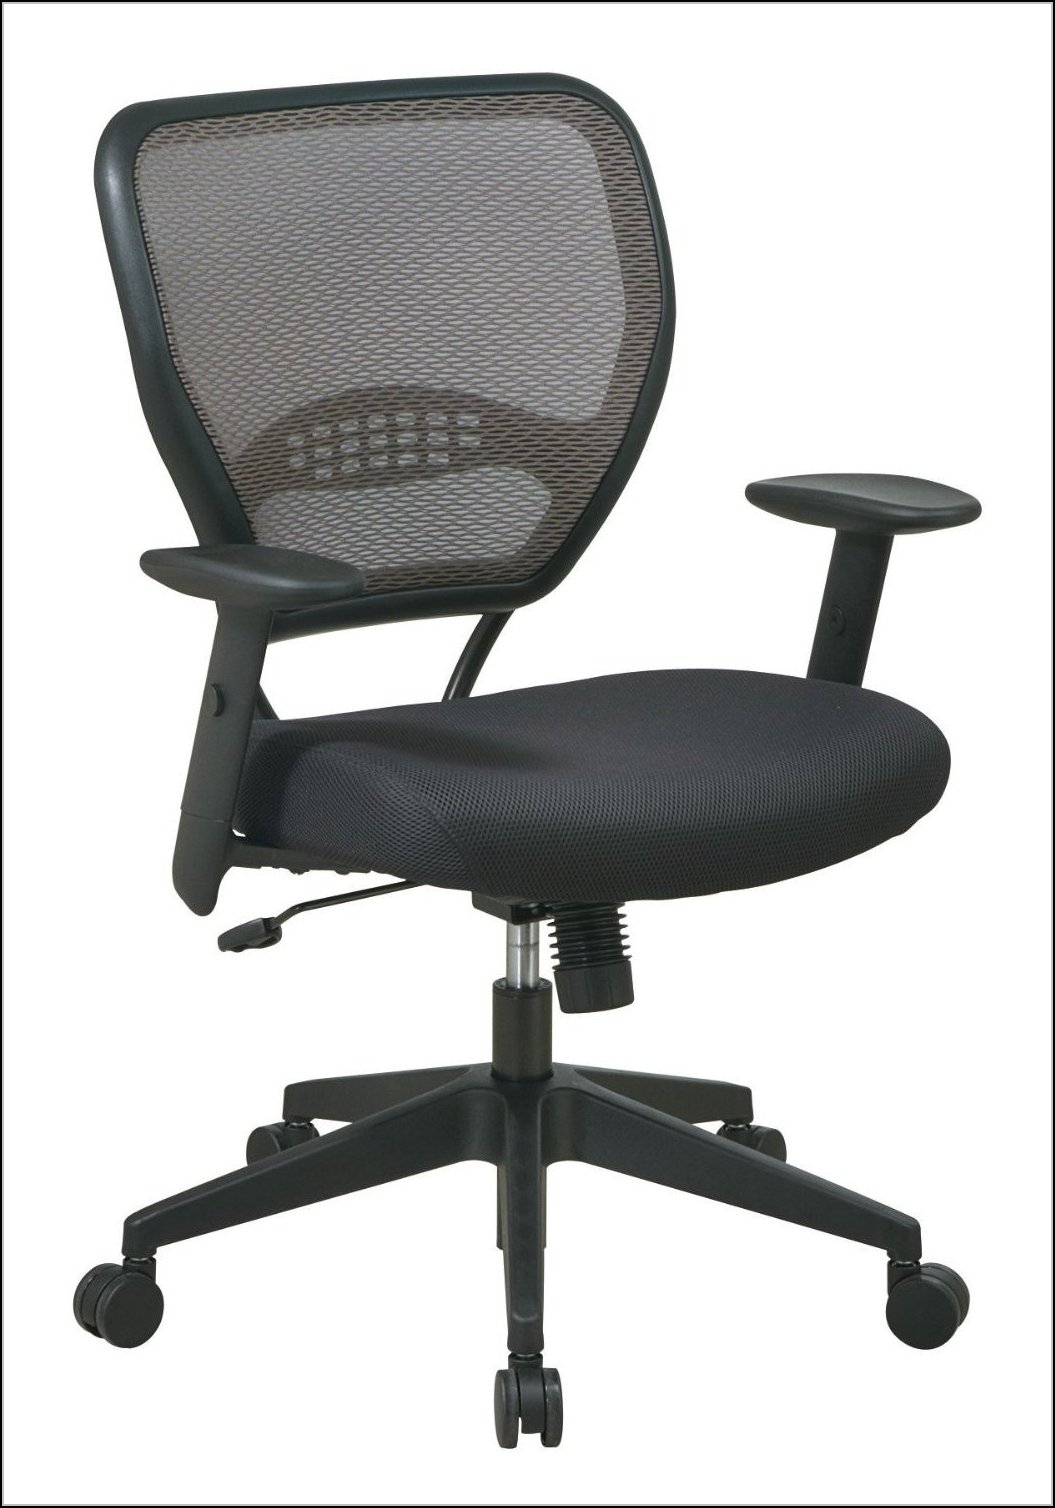 Best Office Chair For Bad Back